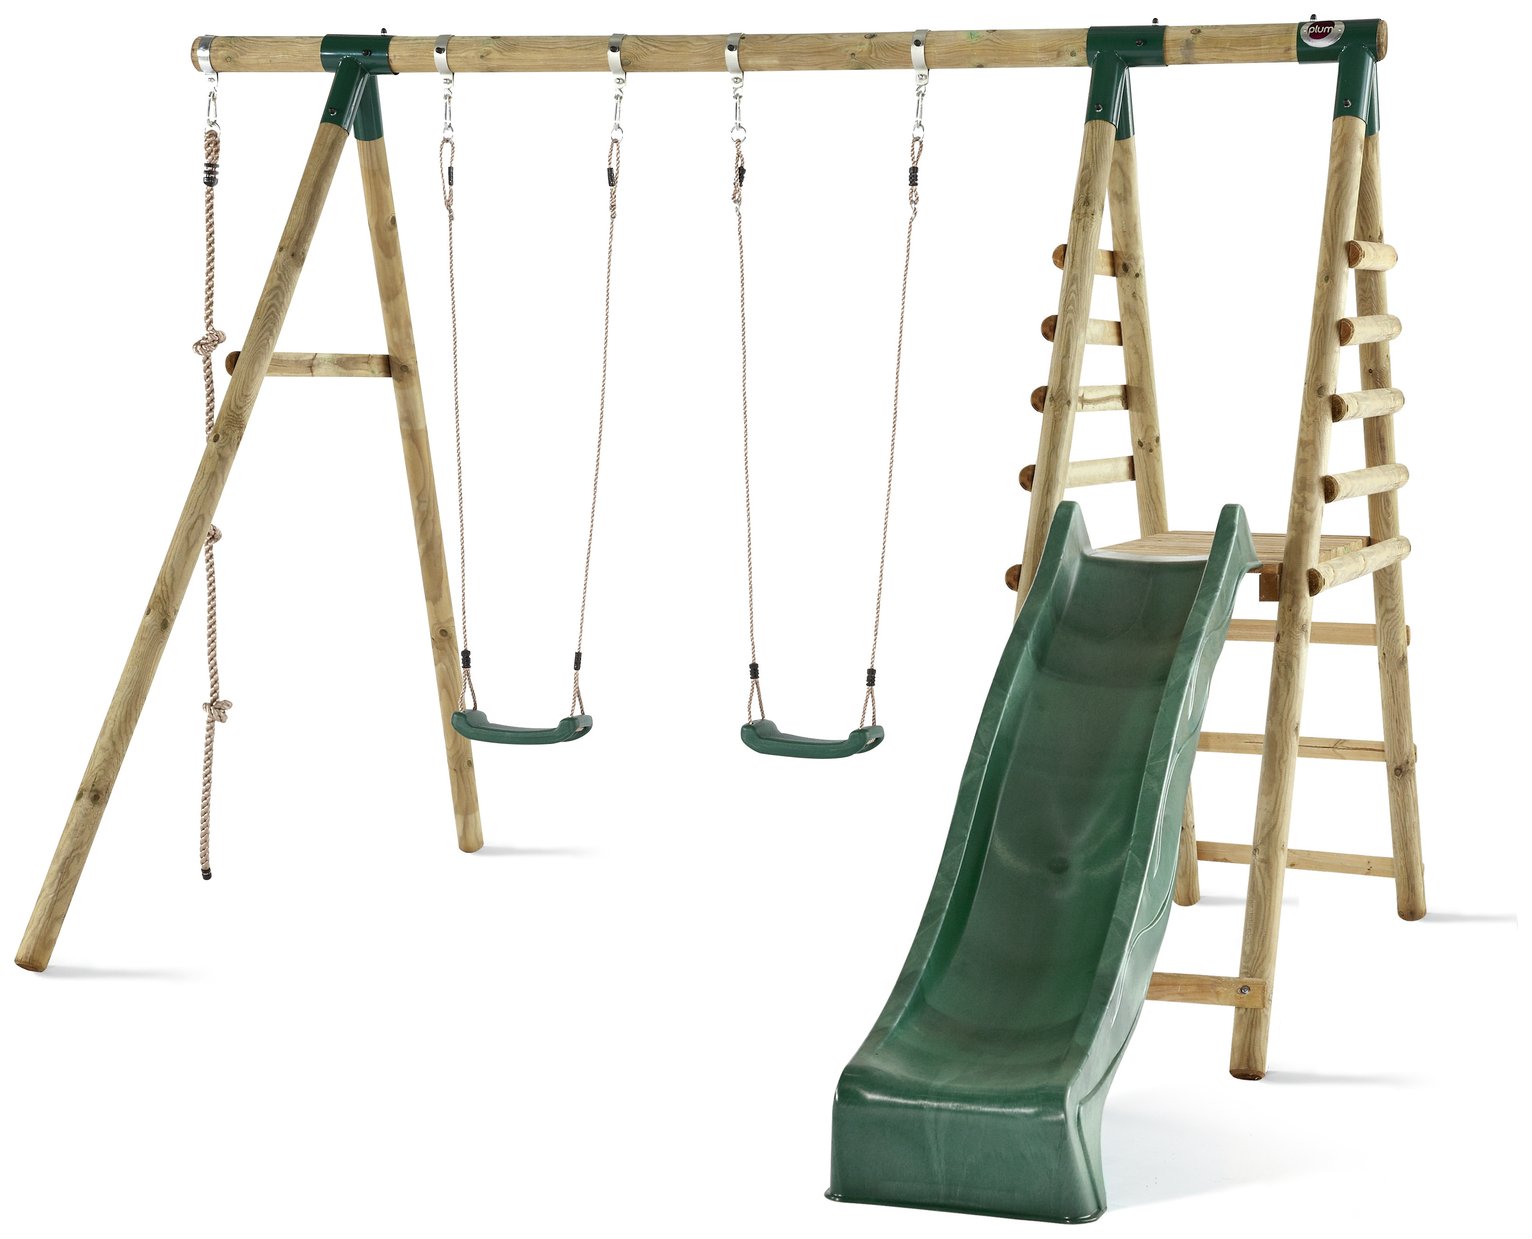 Plum Giant Baboon Wooden Swing Set review